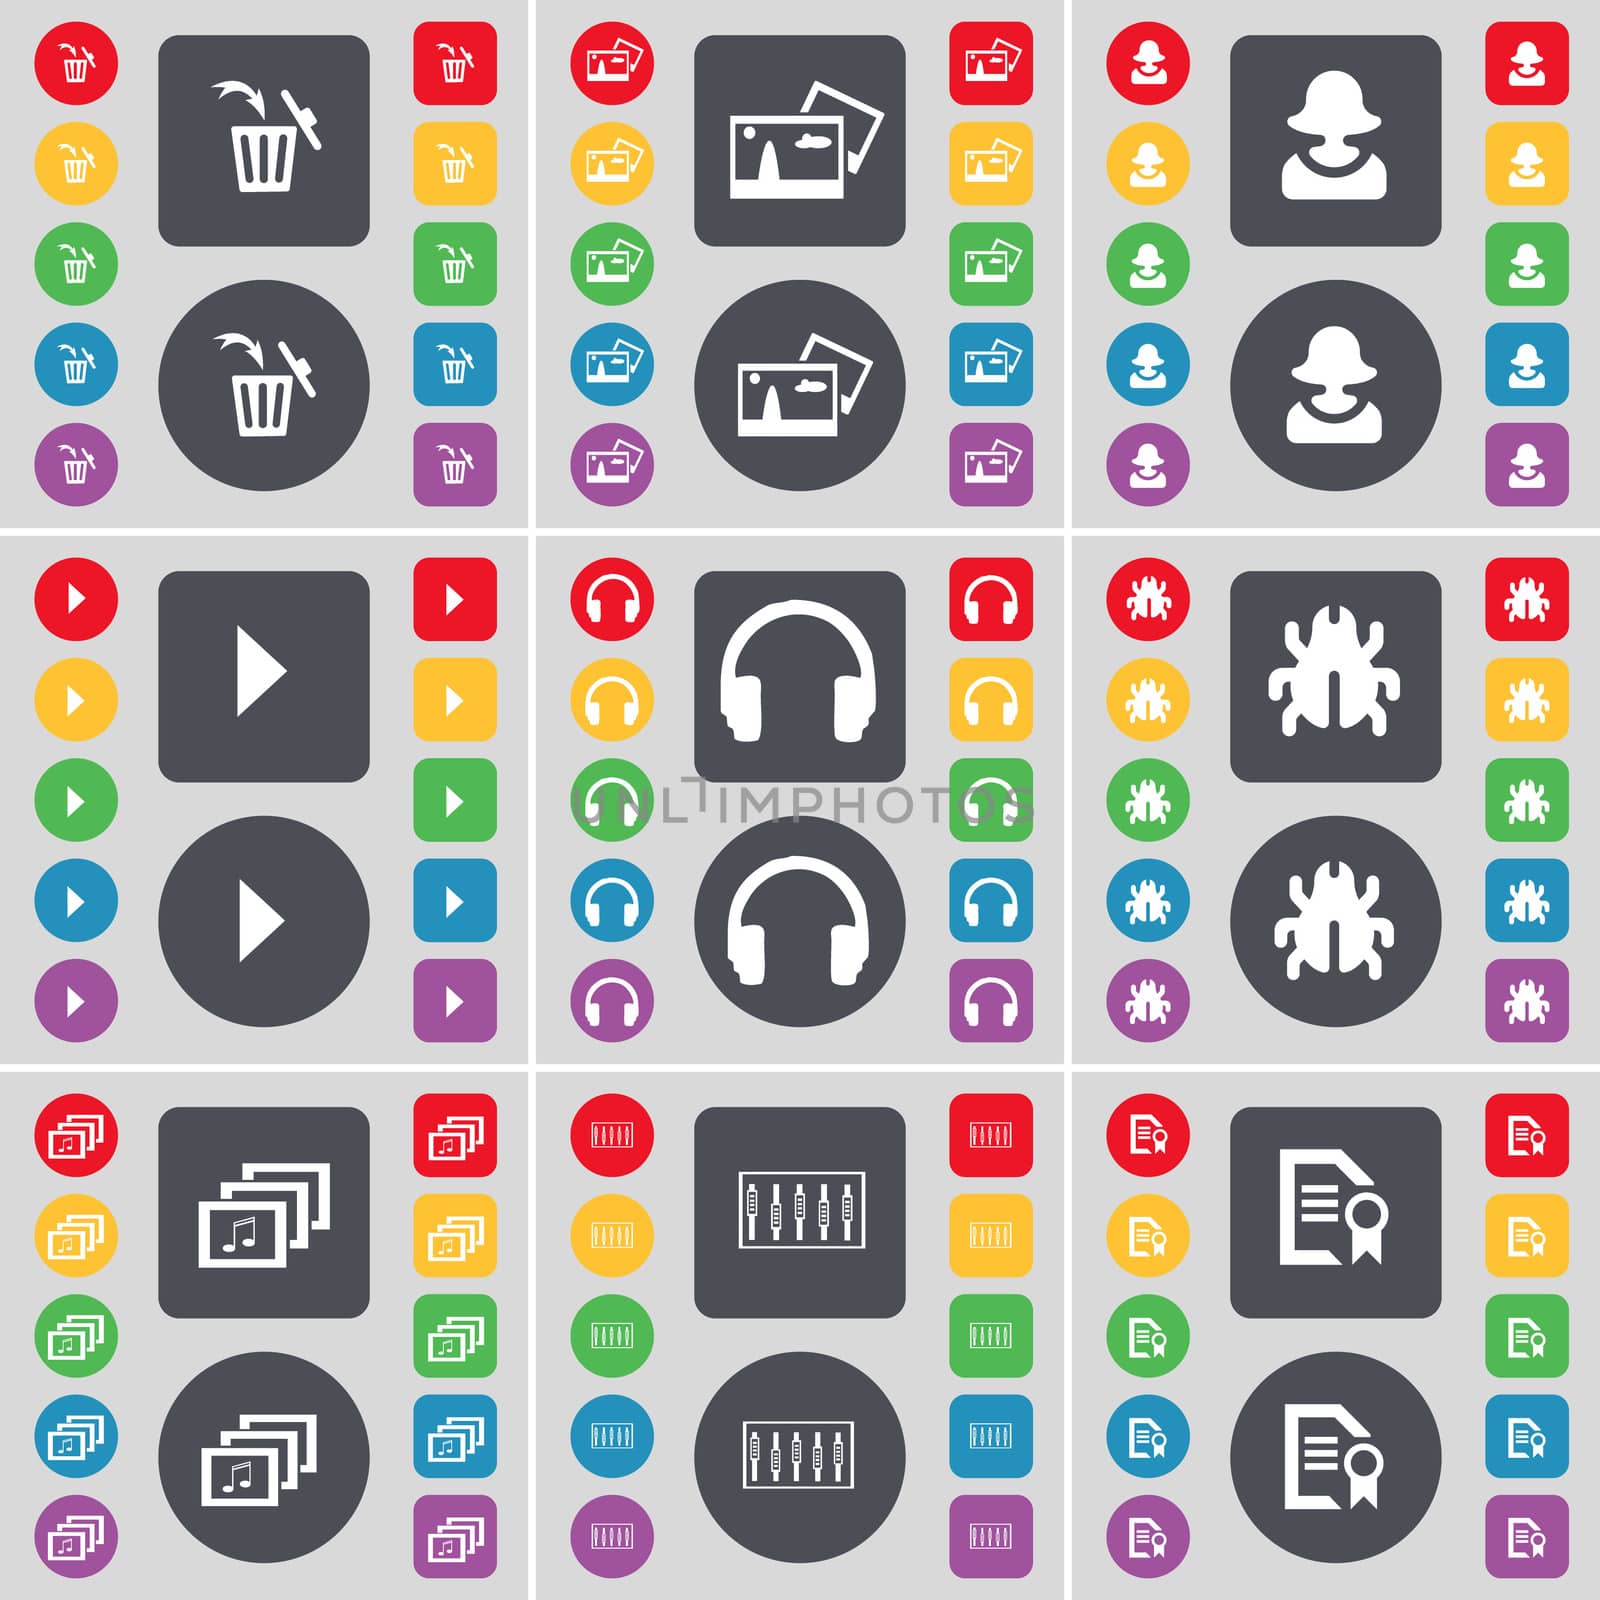 Trash can, Picture, Avatar, Media play, Headphones, Bug, Gallery, Equalizer, Text file icon symbol. A large set of flat, colored buttons for your design. illustration